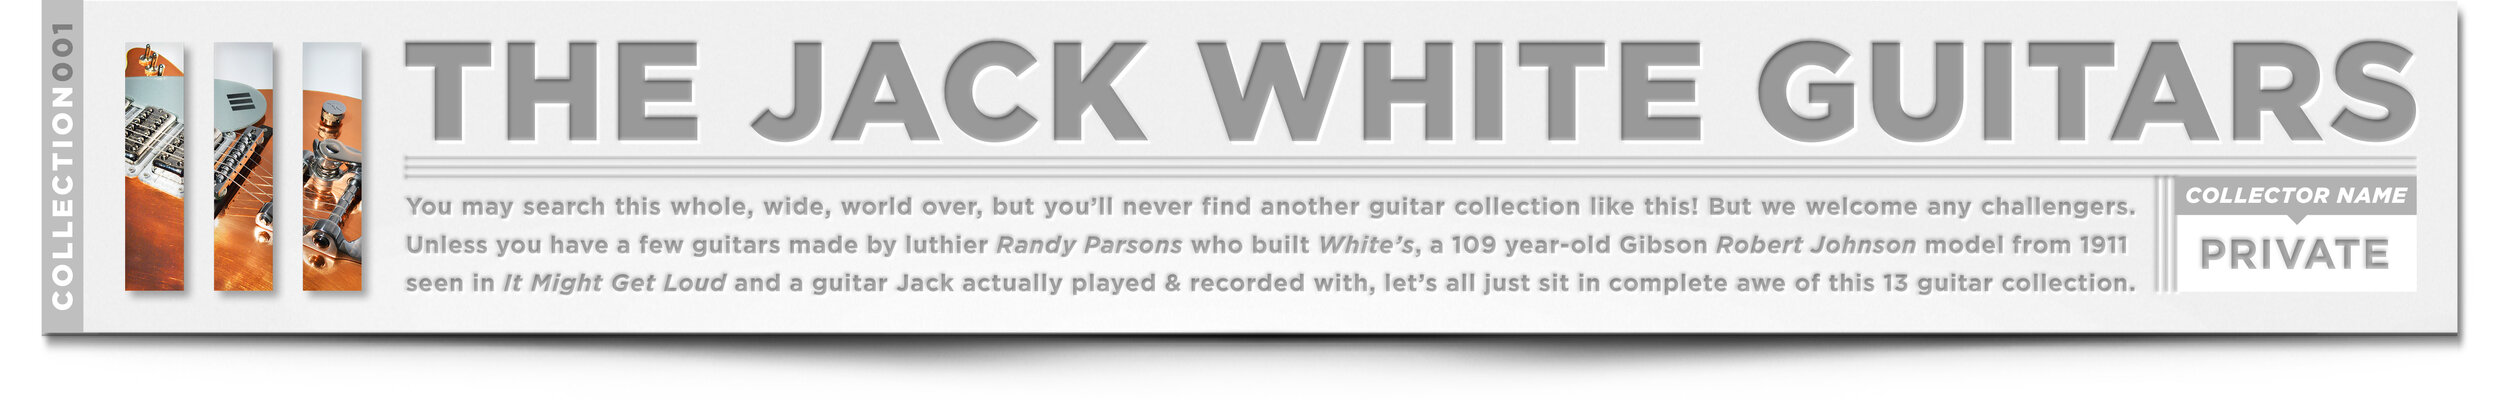 THE JACK WHITE GUITAR COLLECTION.jpg